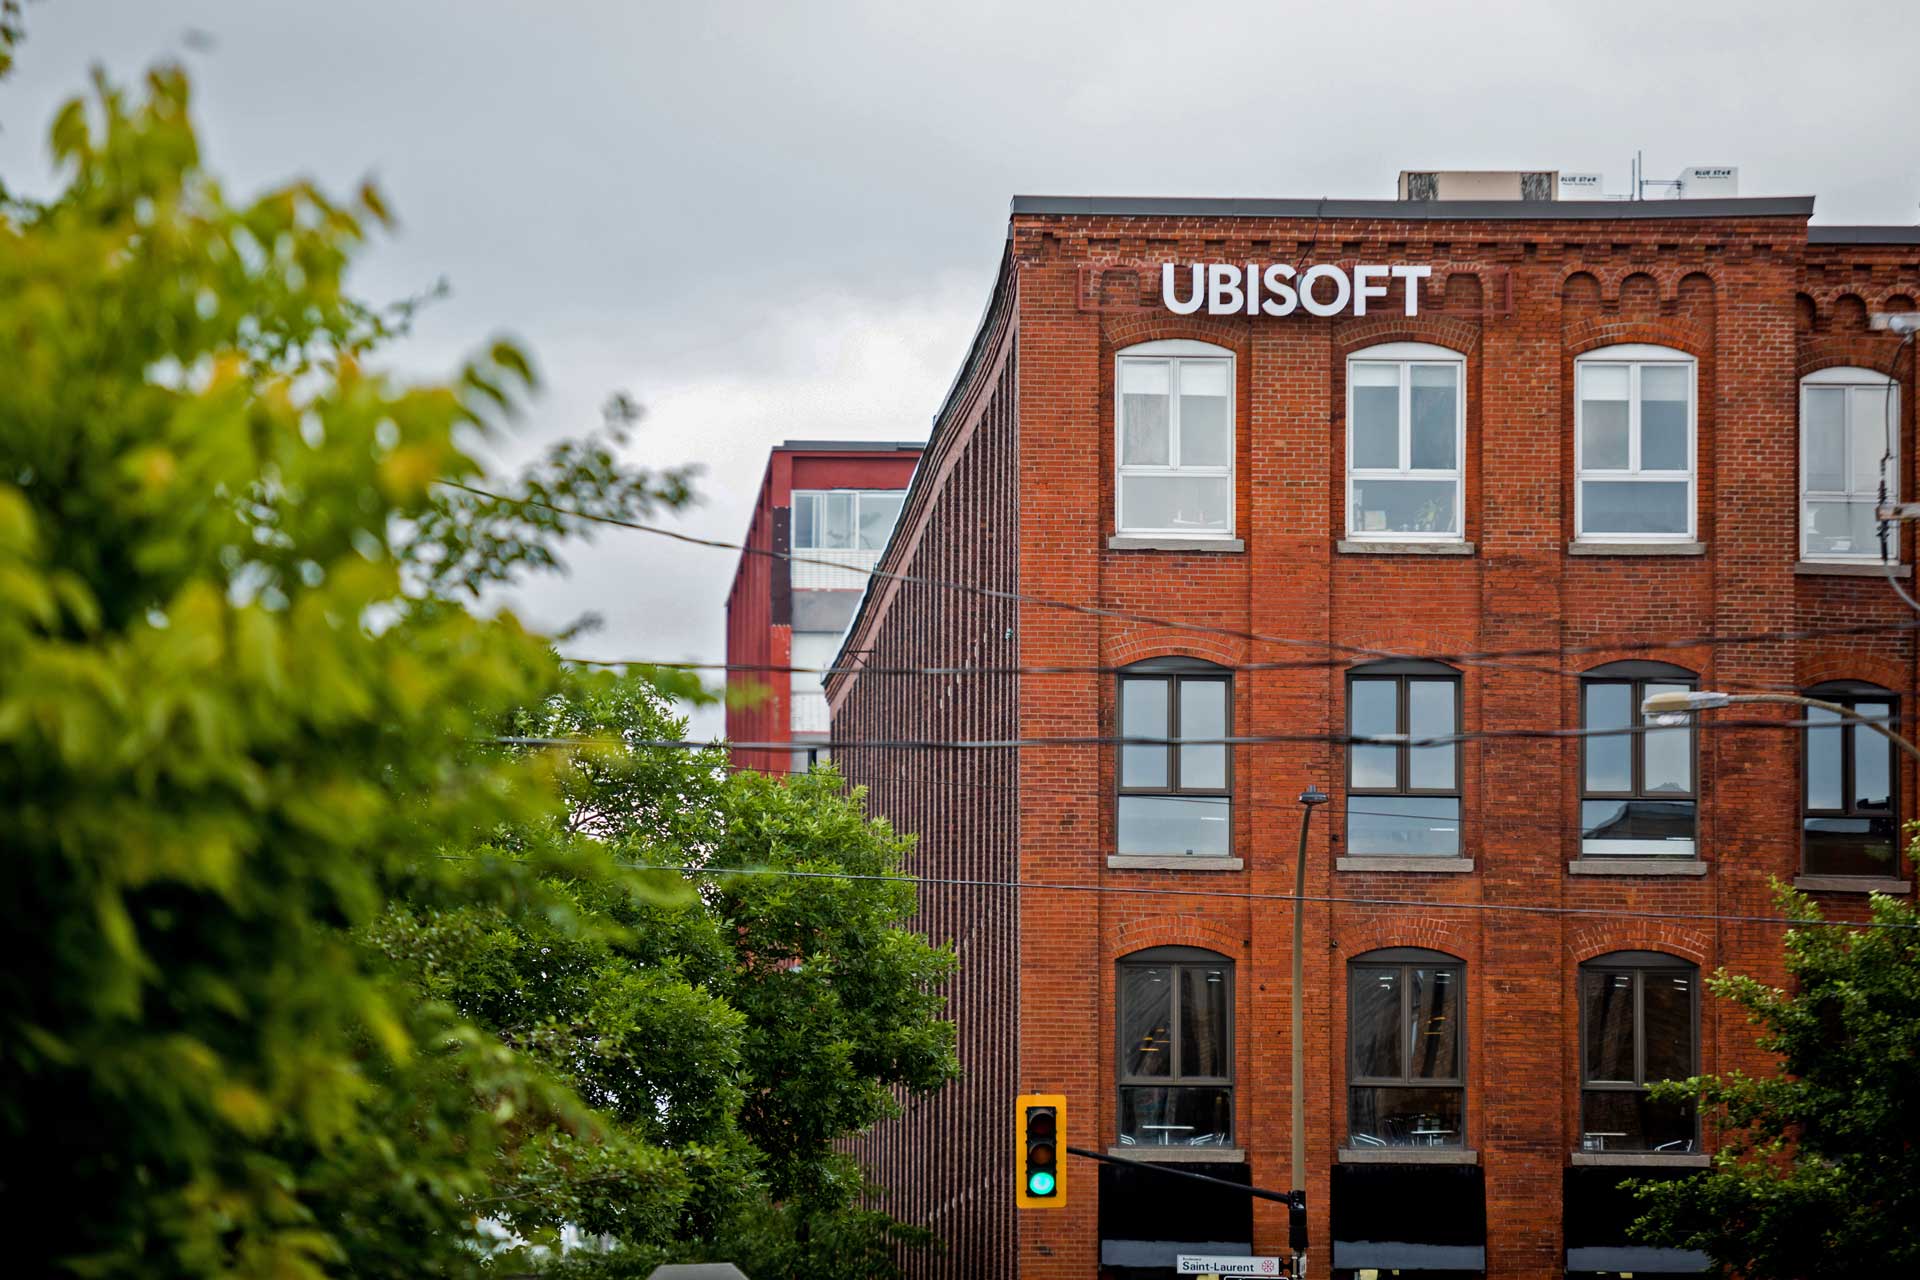  Ubisoft management happy with pace of reforms after workplace harassment reckoning, but employees aren't buying it 